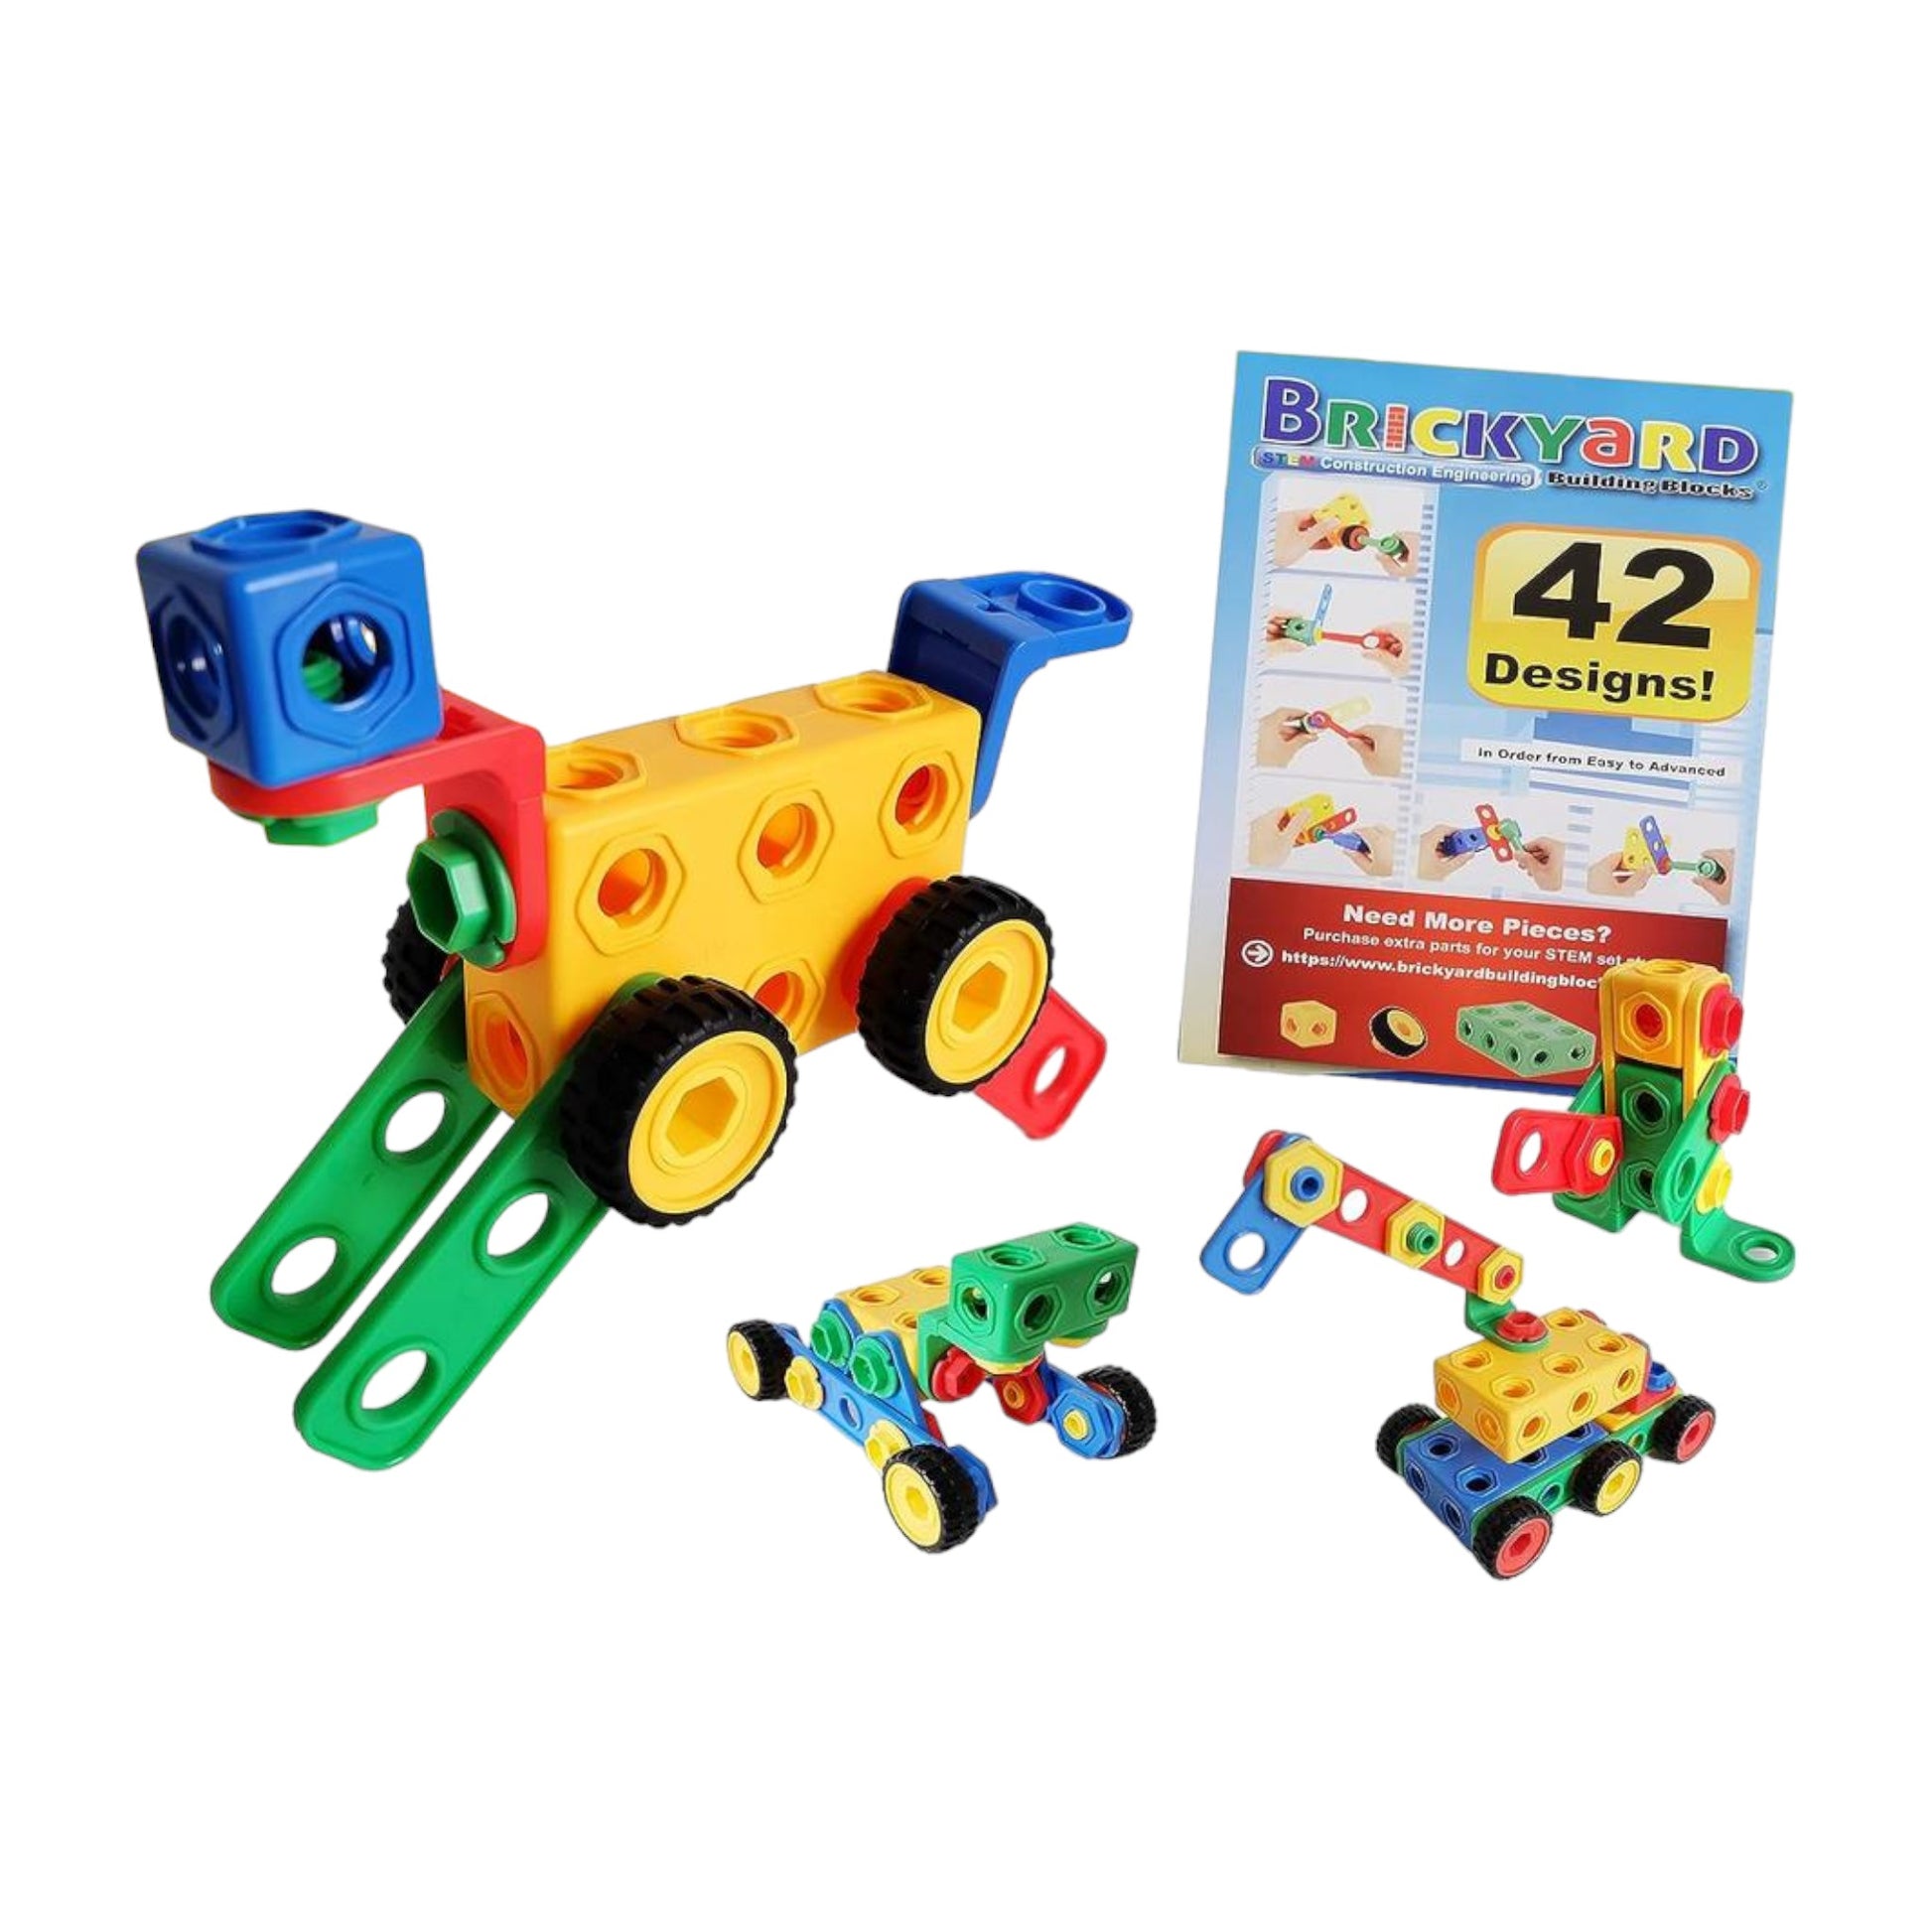 Brickyard STEM Building Blocks for Kids 4-8 | 163-Pc Educational Toys Set with Tools & Guide - Ricky's Garage